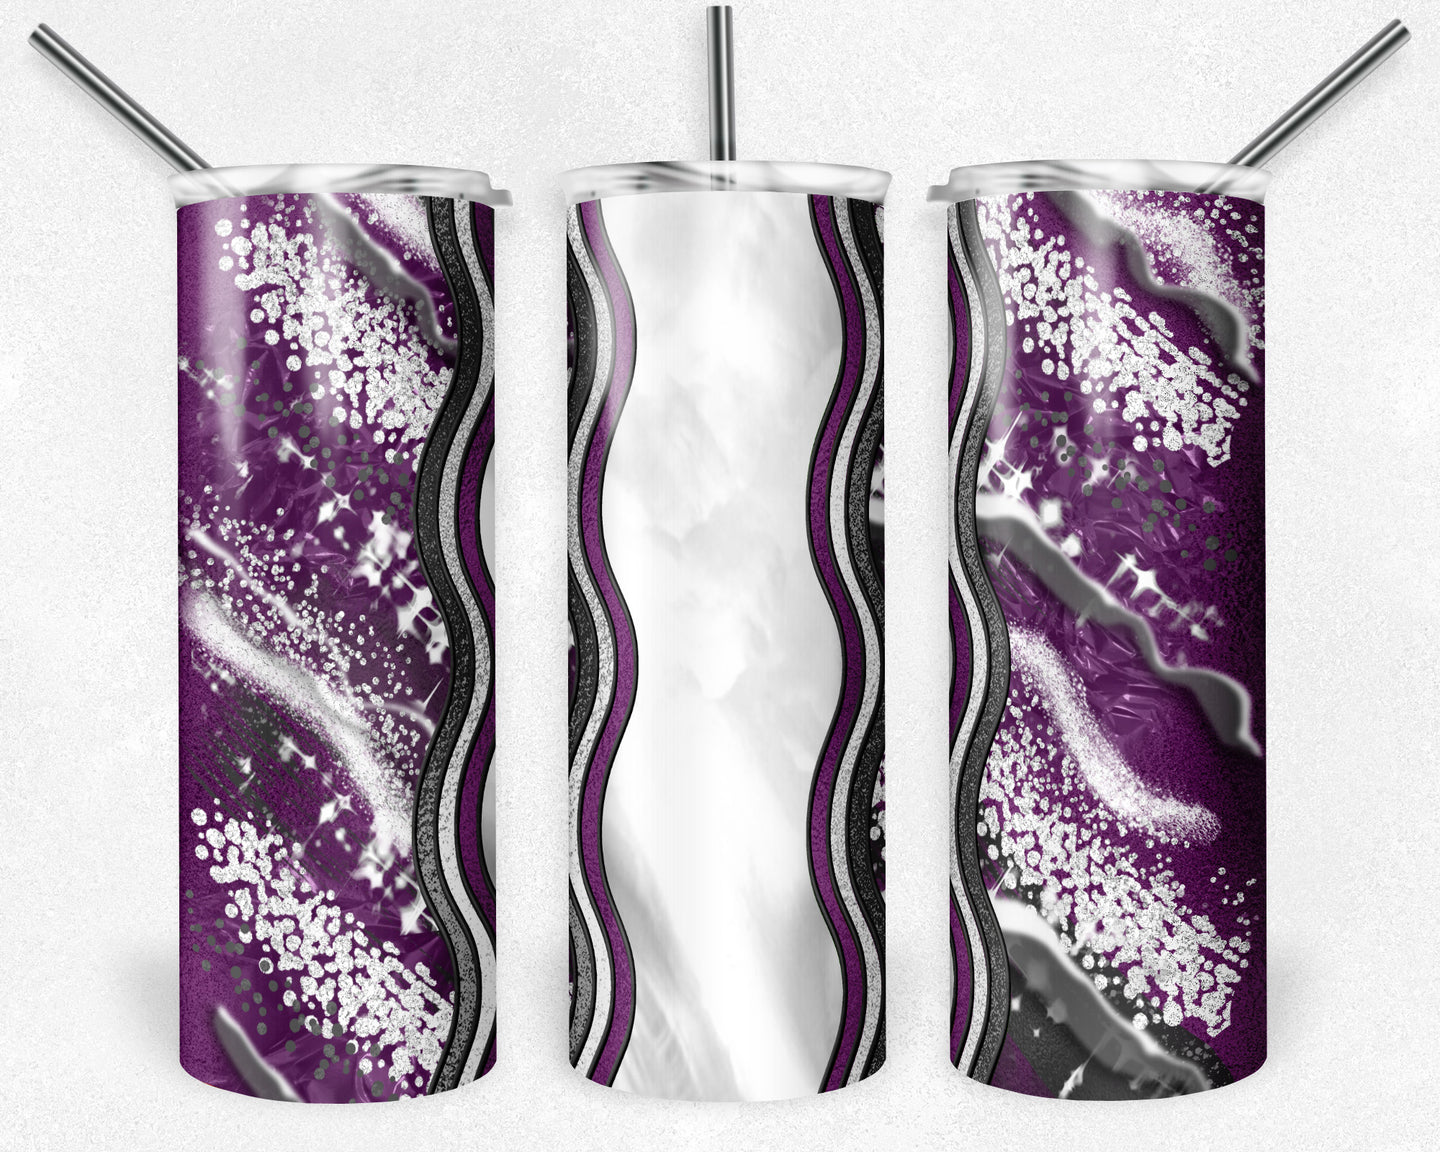 Purple and Gray Milky Way with Stained Glass Border Blank